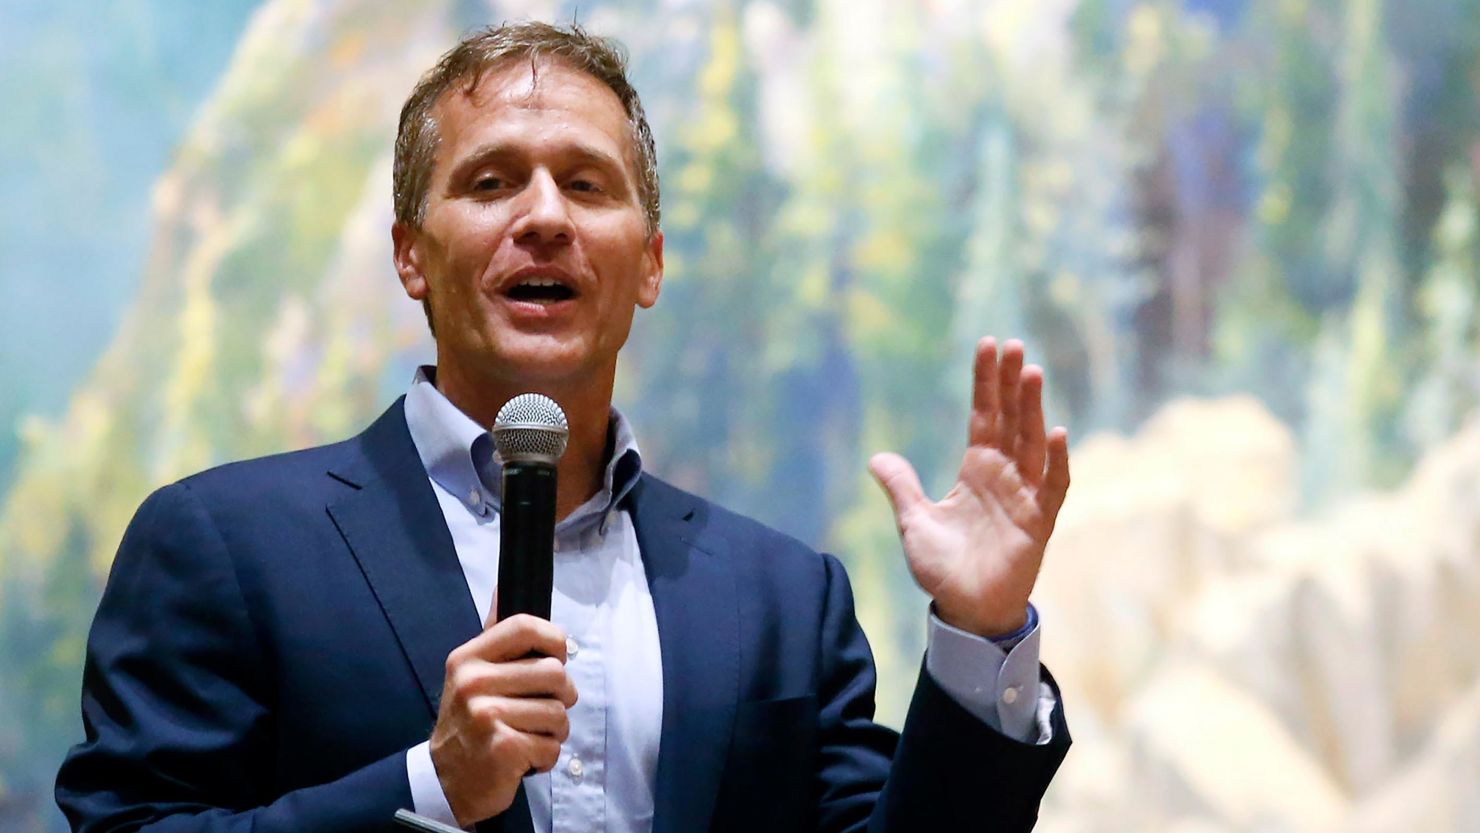 Former Missouri Gov. Eric Greitens, now a US Senate candidate, speaks at the Taney County Lincoln Day event in April 2021, at the Chateau on the Lake in Branson, Missouri.